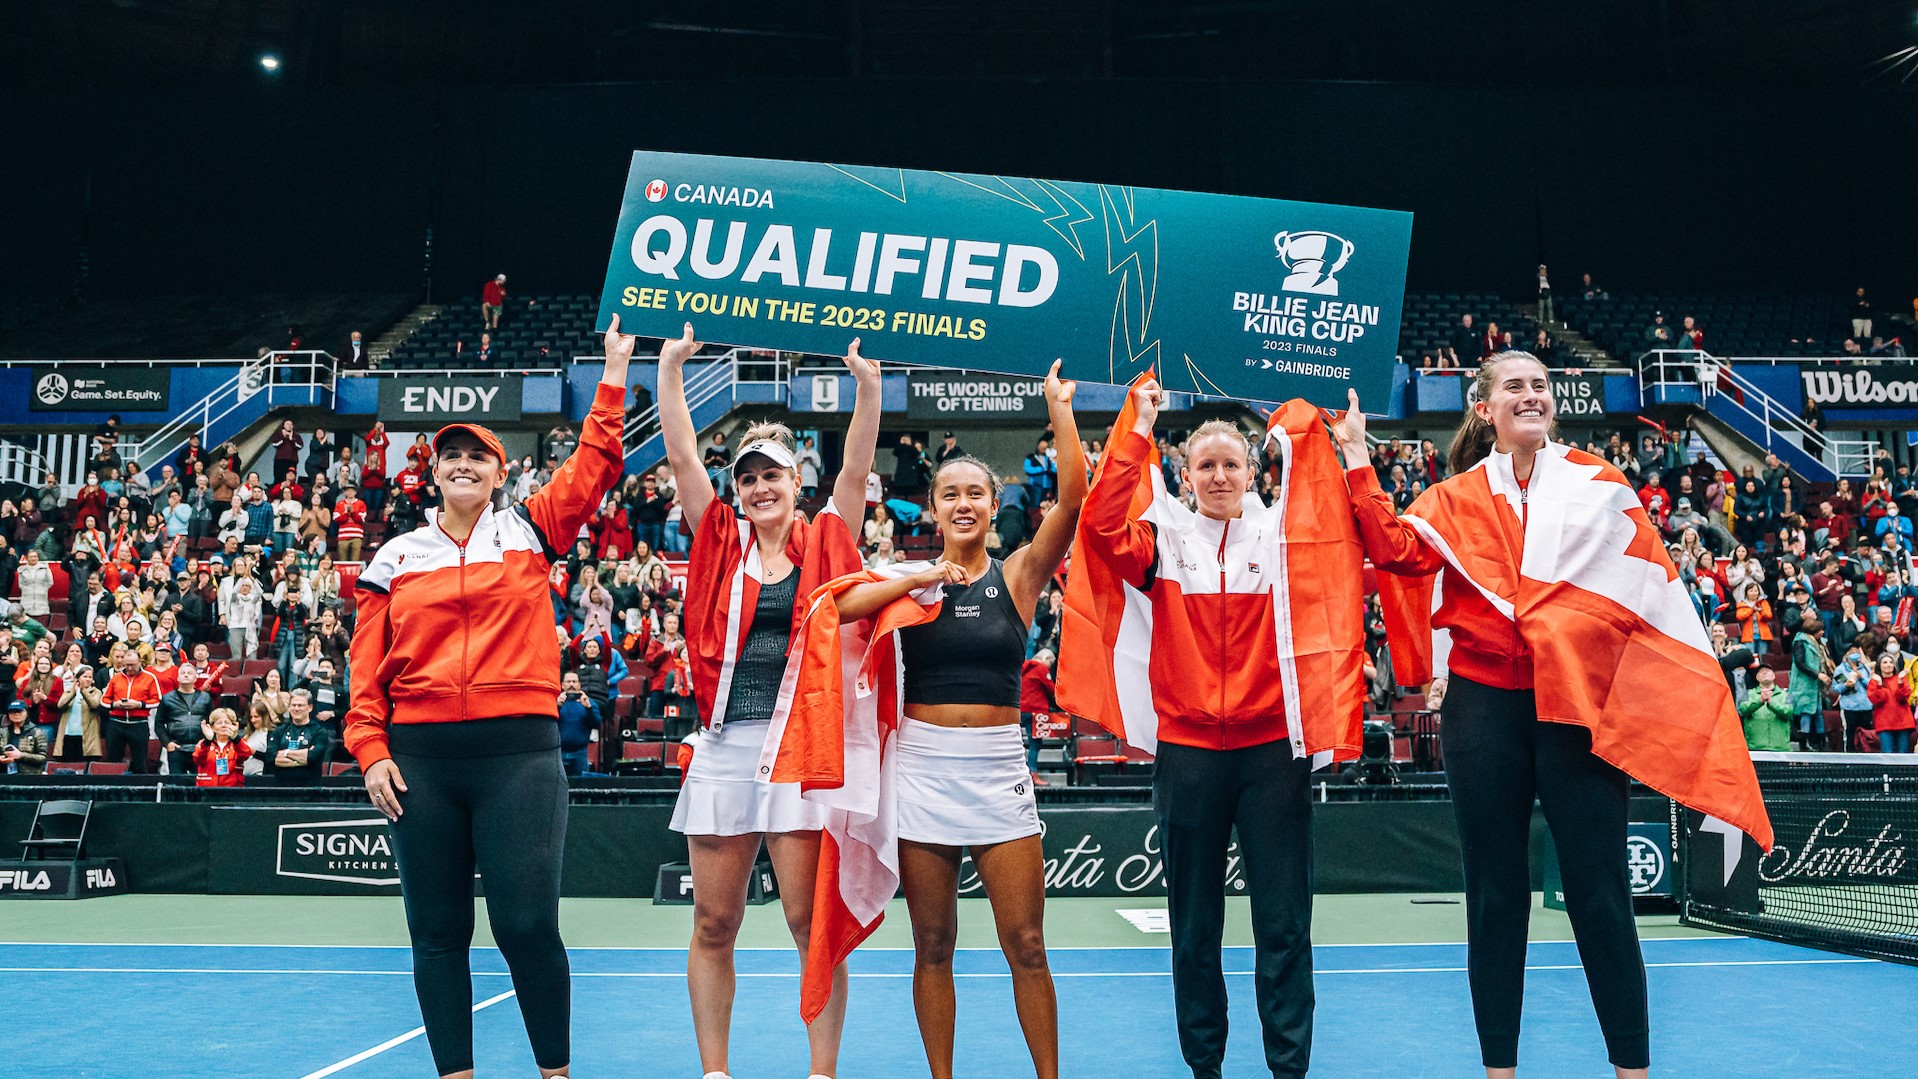 Leyla Fernandez and the rest of Team Canada hold up a victor's banner as Team Canada moves on to the Billie Jean King Cup Finals in November